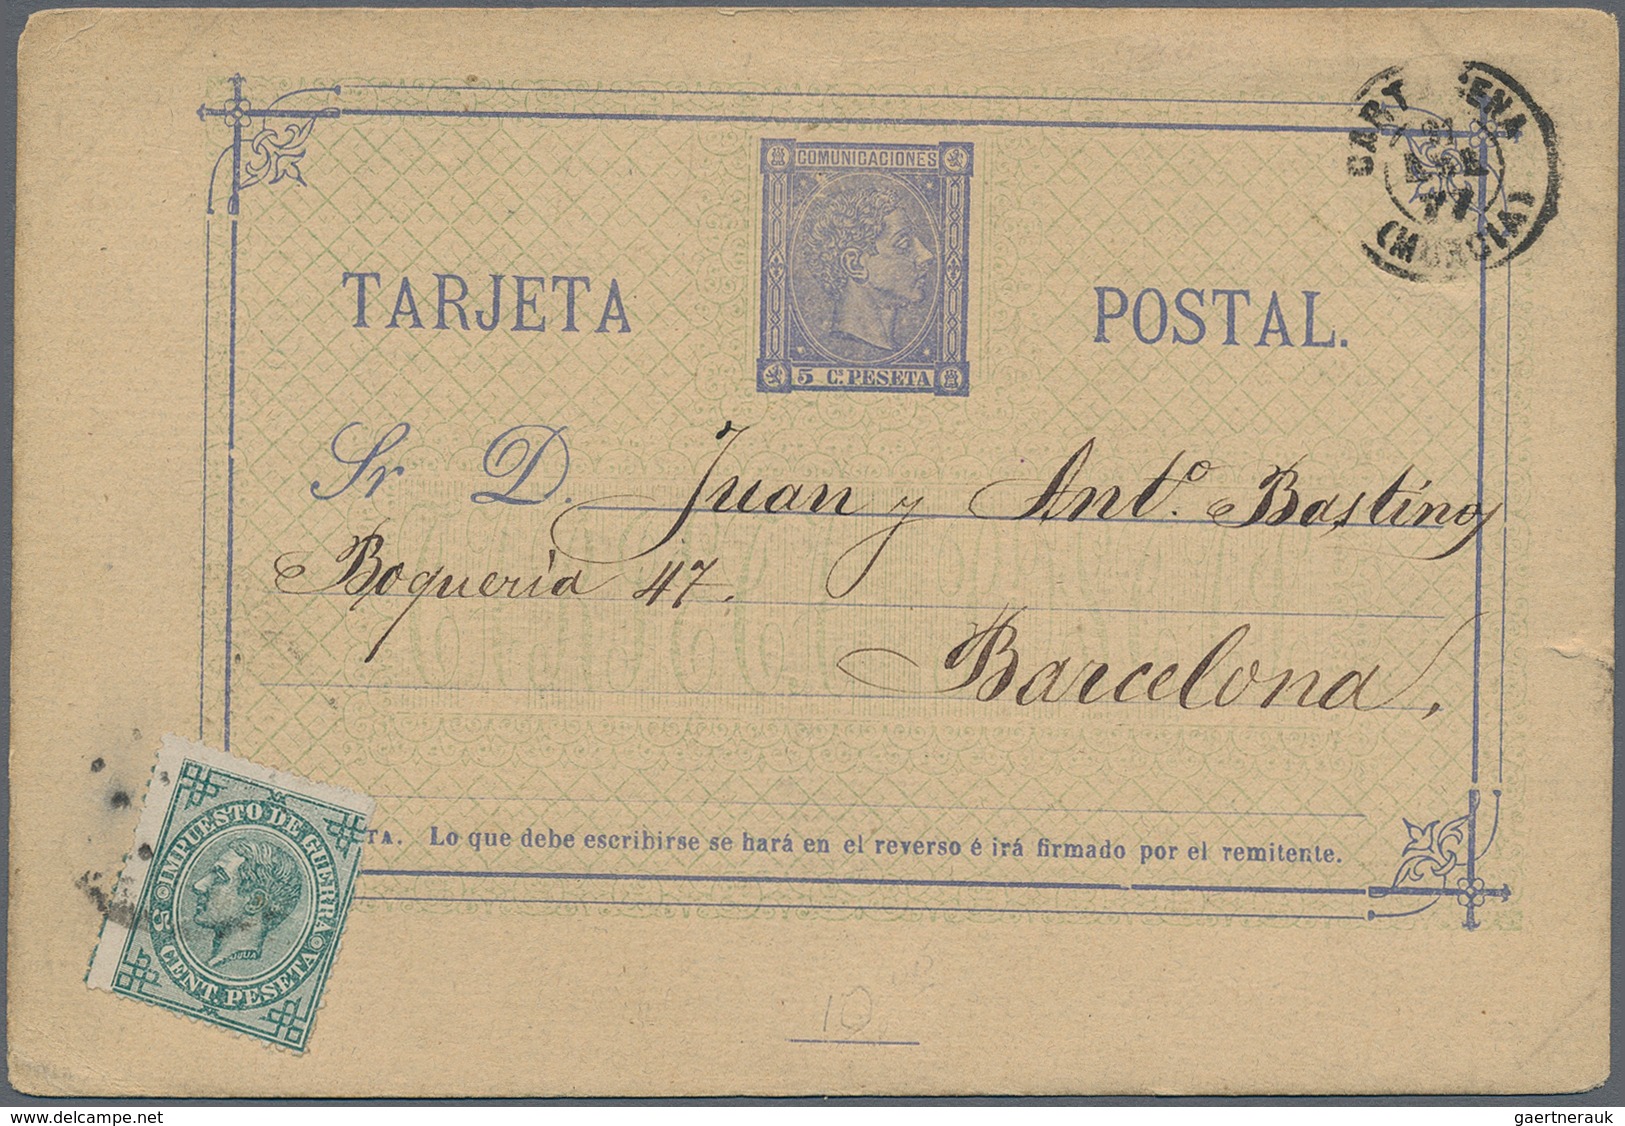 Spanien: 1860/1960 (ca.), Spain/colonies, holding of some hundred covers/cards, incl. registered, ce